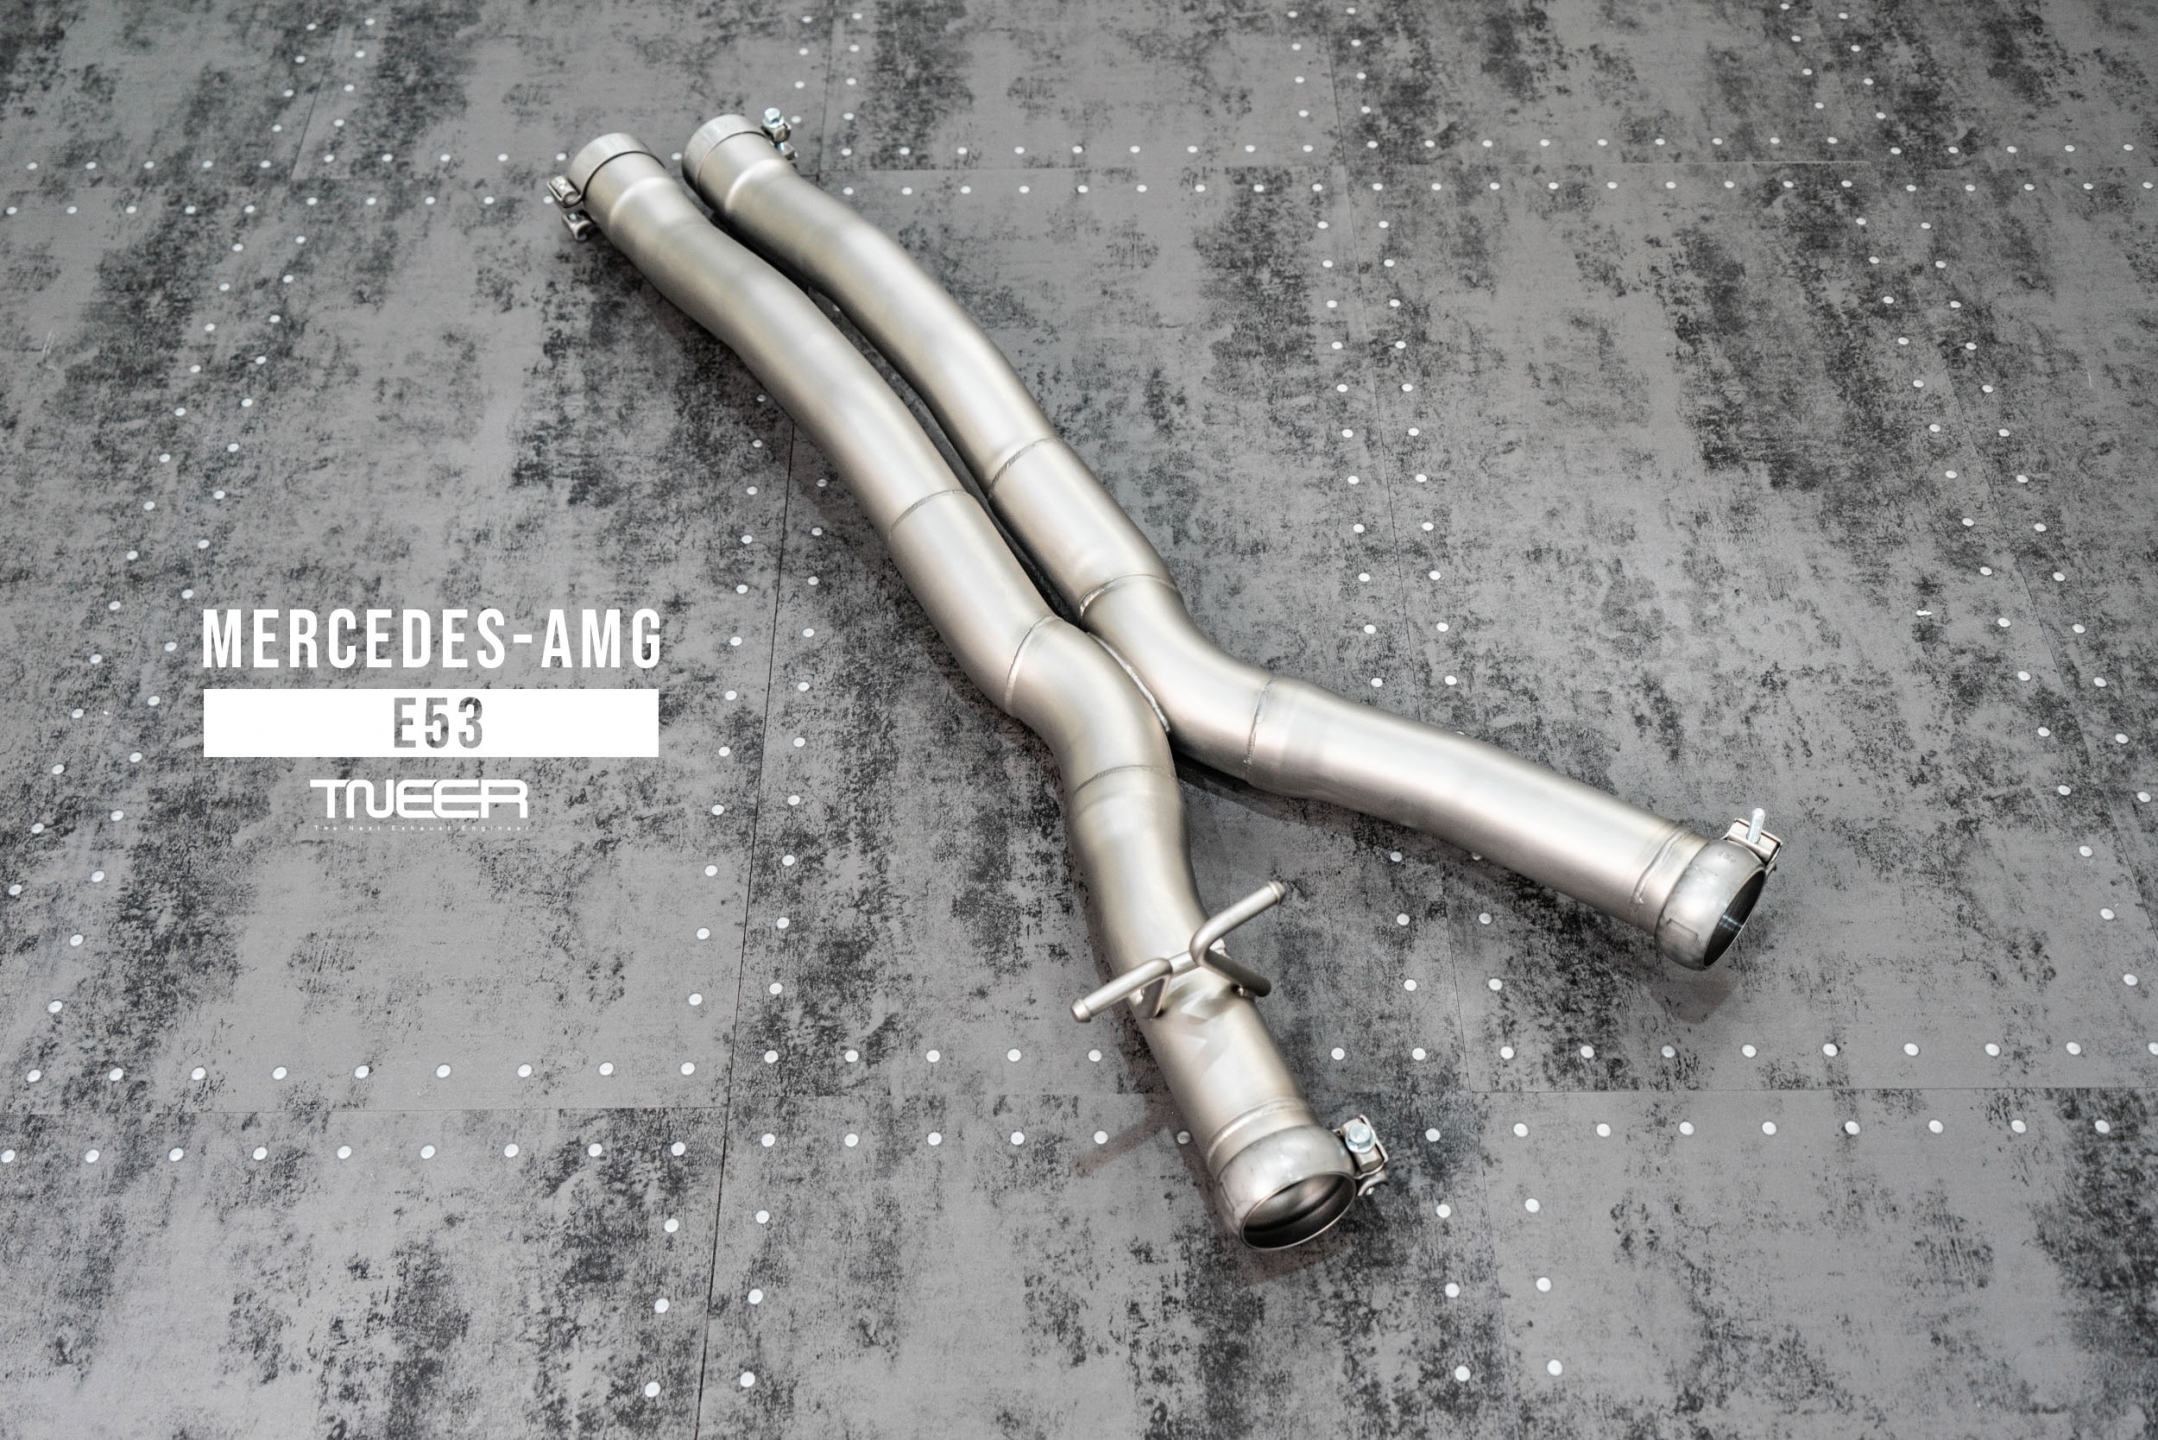 Mercedes-AMG W213 E53 (LHD) TNEER Performance Exhaust System